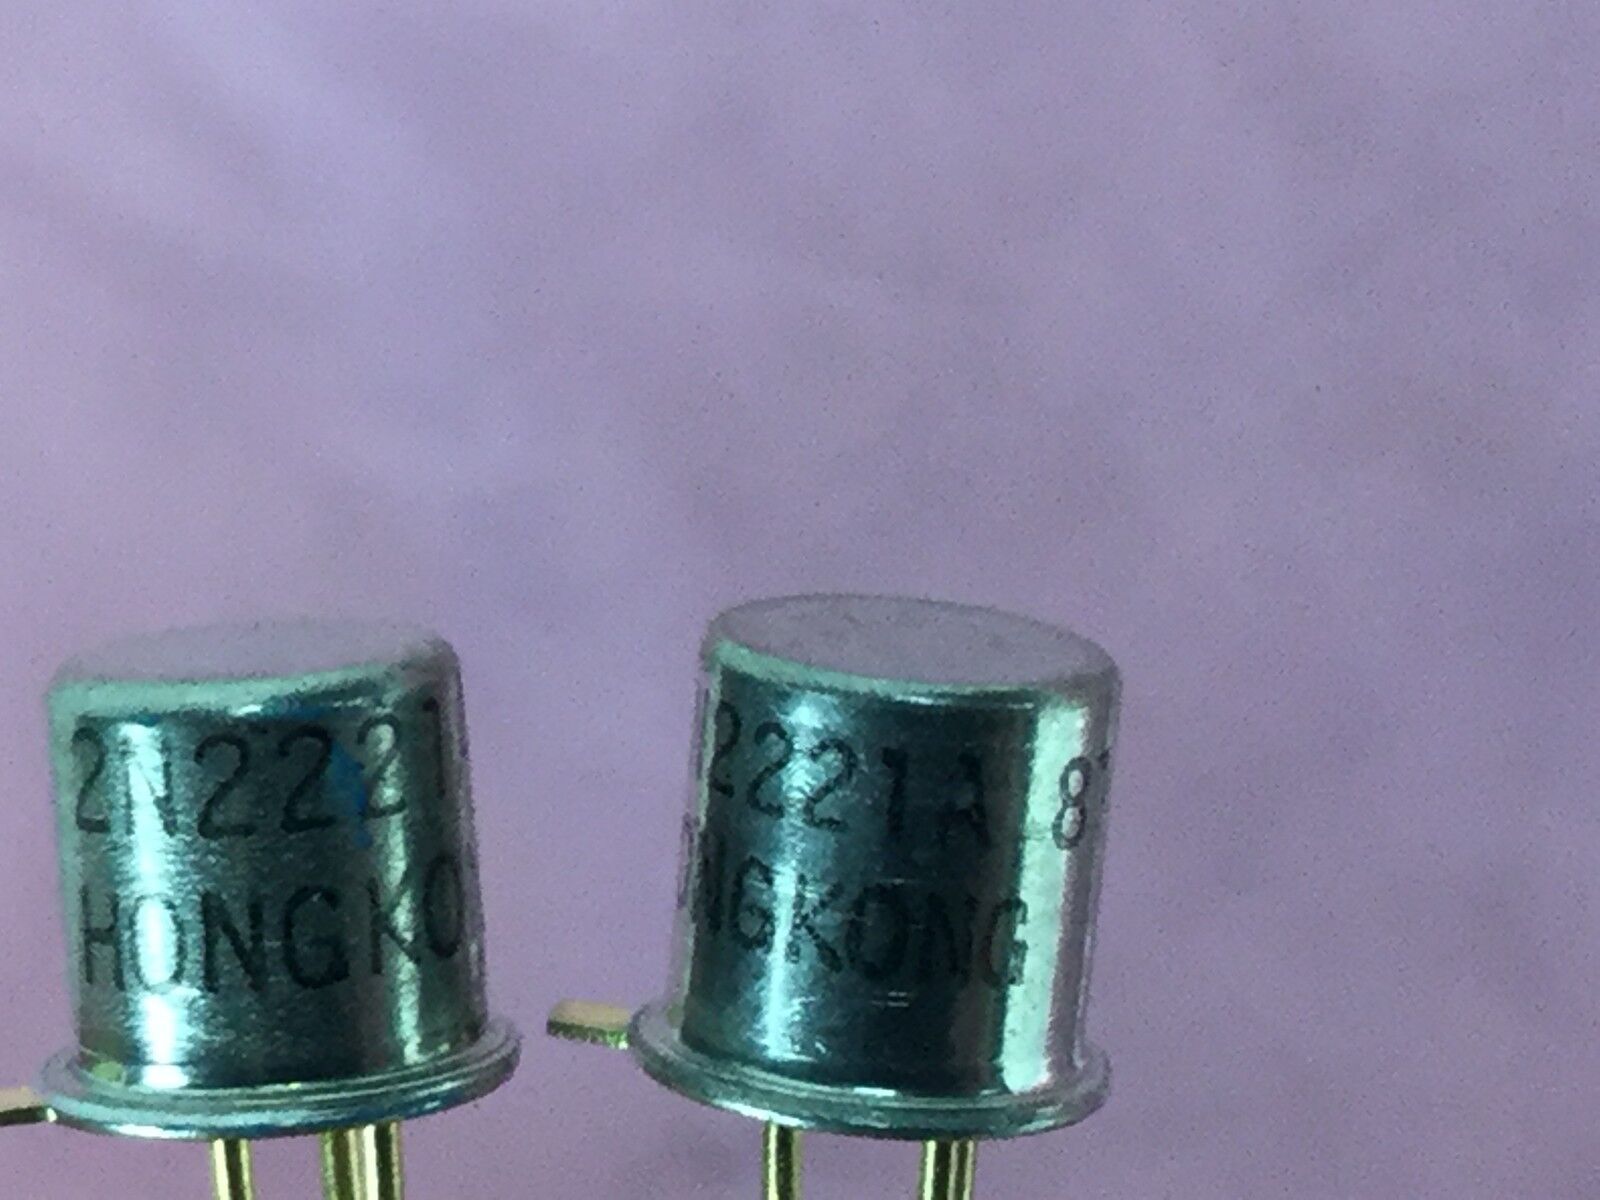 NEW Fairchild 2N2221A Bipolar Transistors - BJT, TO-18, Lot of 20